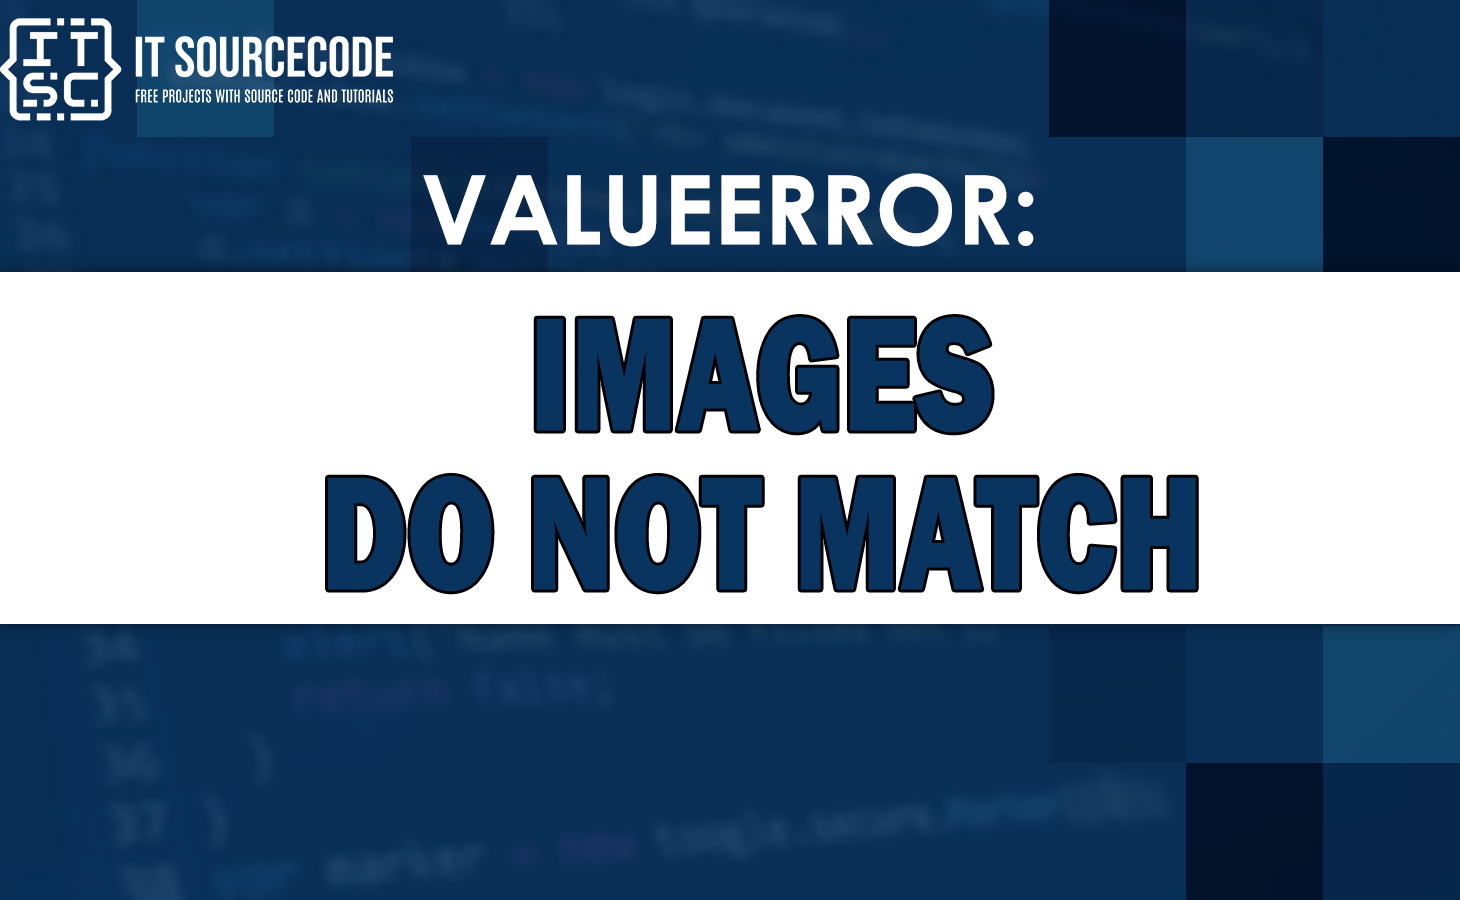 valueerror images do not match